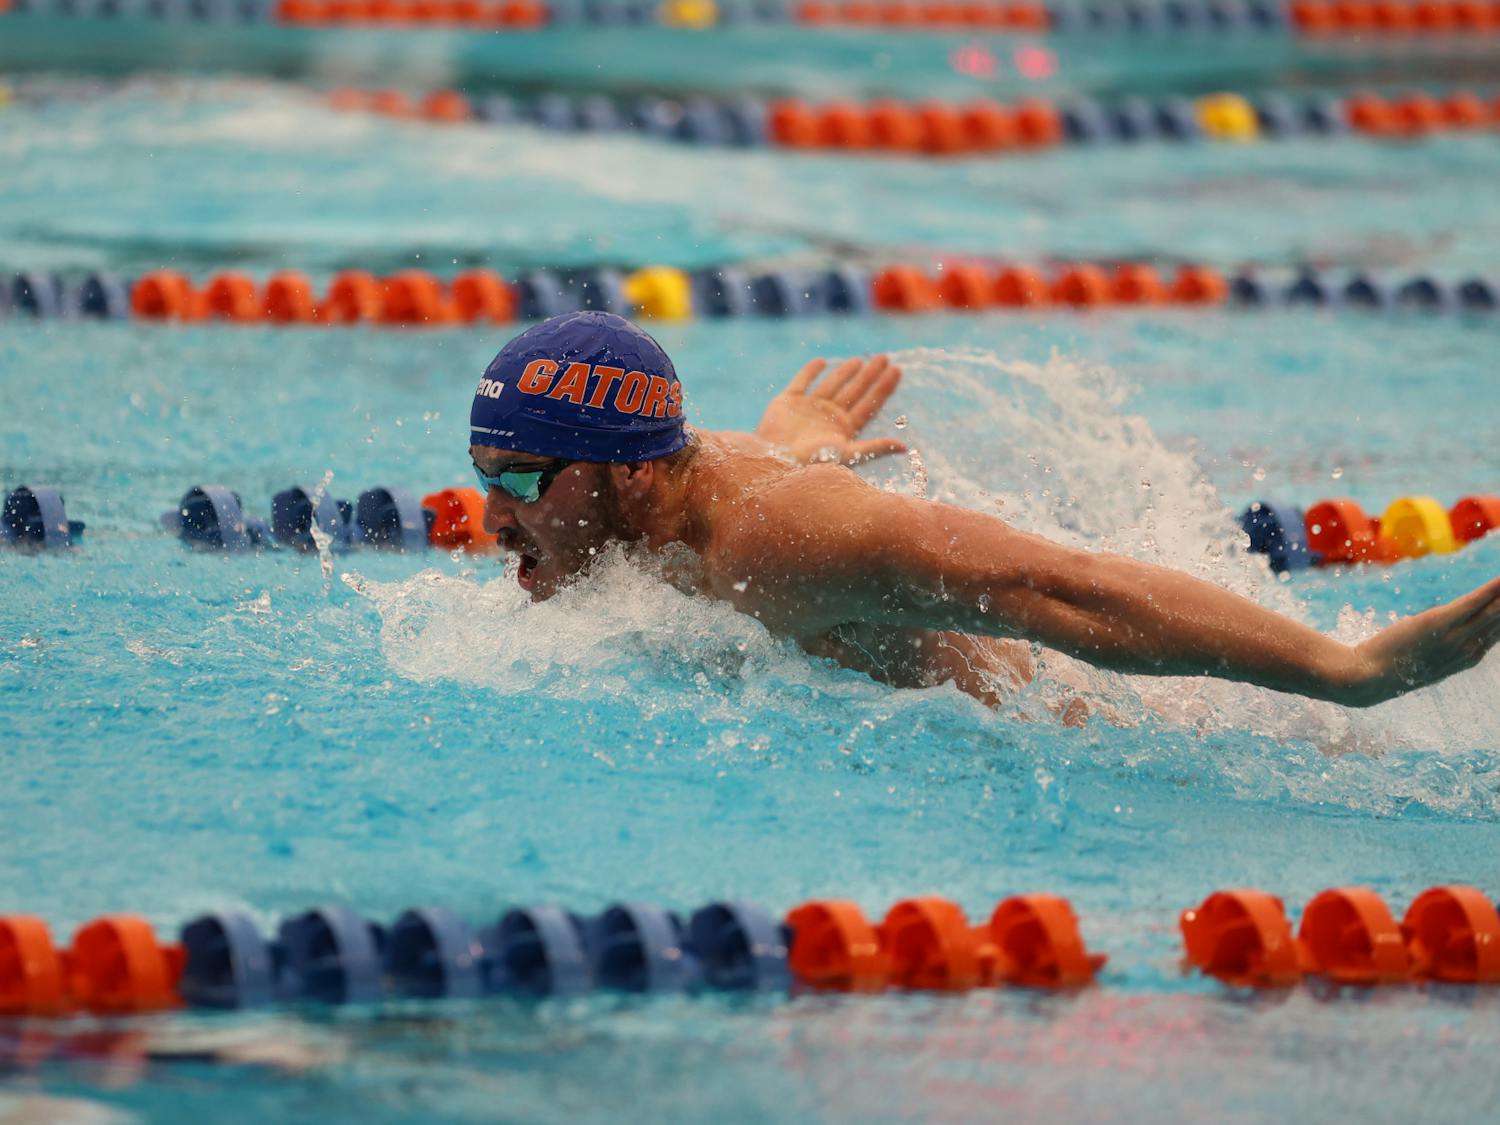  Senior Amro Al-Wir competes during the Gators' meet against the Virginia Cavaliers on Friday, October 13, 2023, at the Stephen C. O'Connell Center Natatorium in Gainesville, Florida.